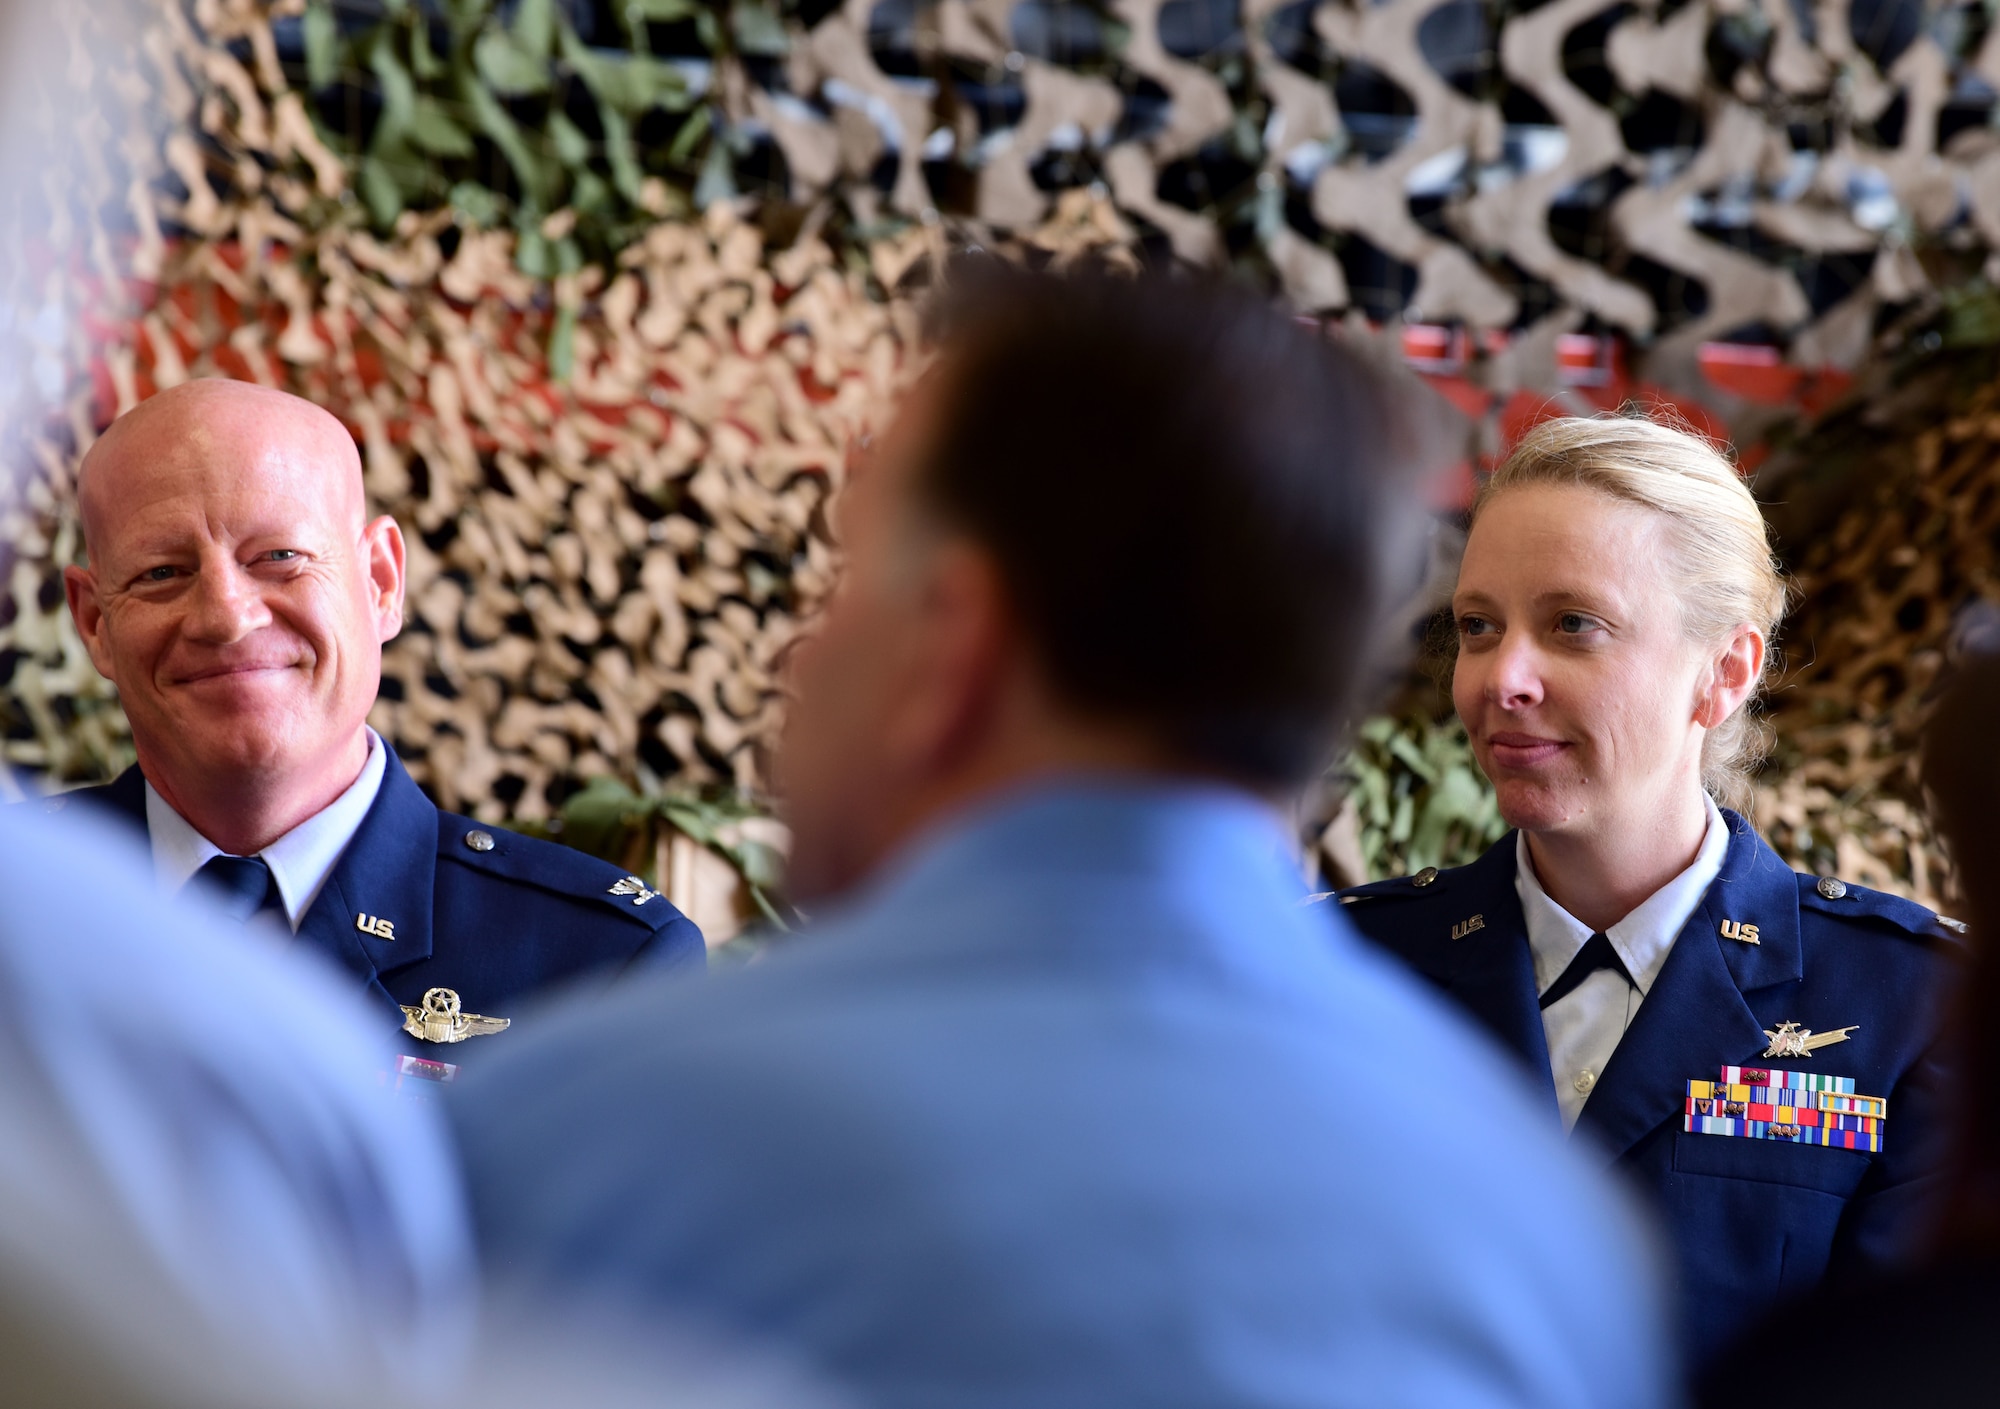 Col. Todd Tobergte, 926th Operations Group commander, sits adjacent to Lt. Col. Laura Kohake, outgoing 26th Space Aggressor Squadron commander, during a ceremony June 1, 2019.